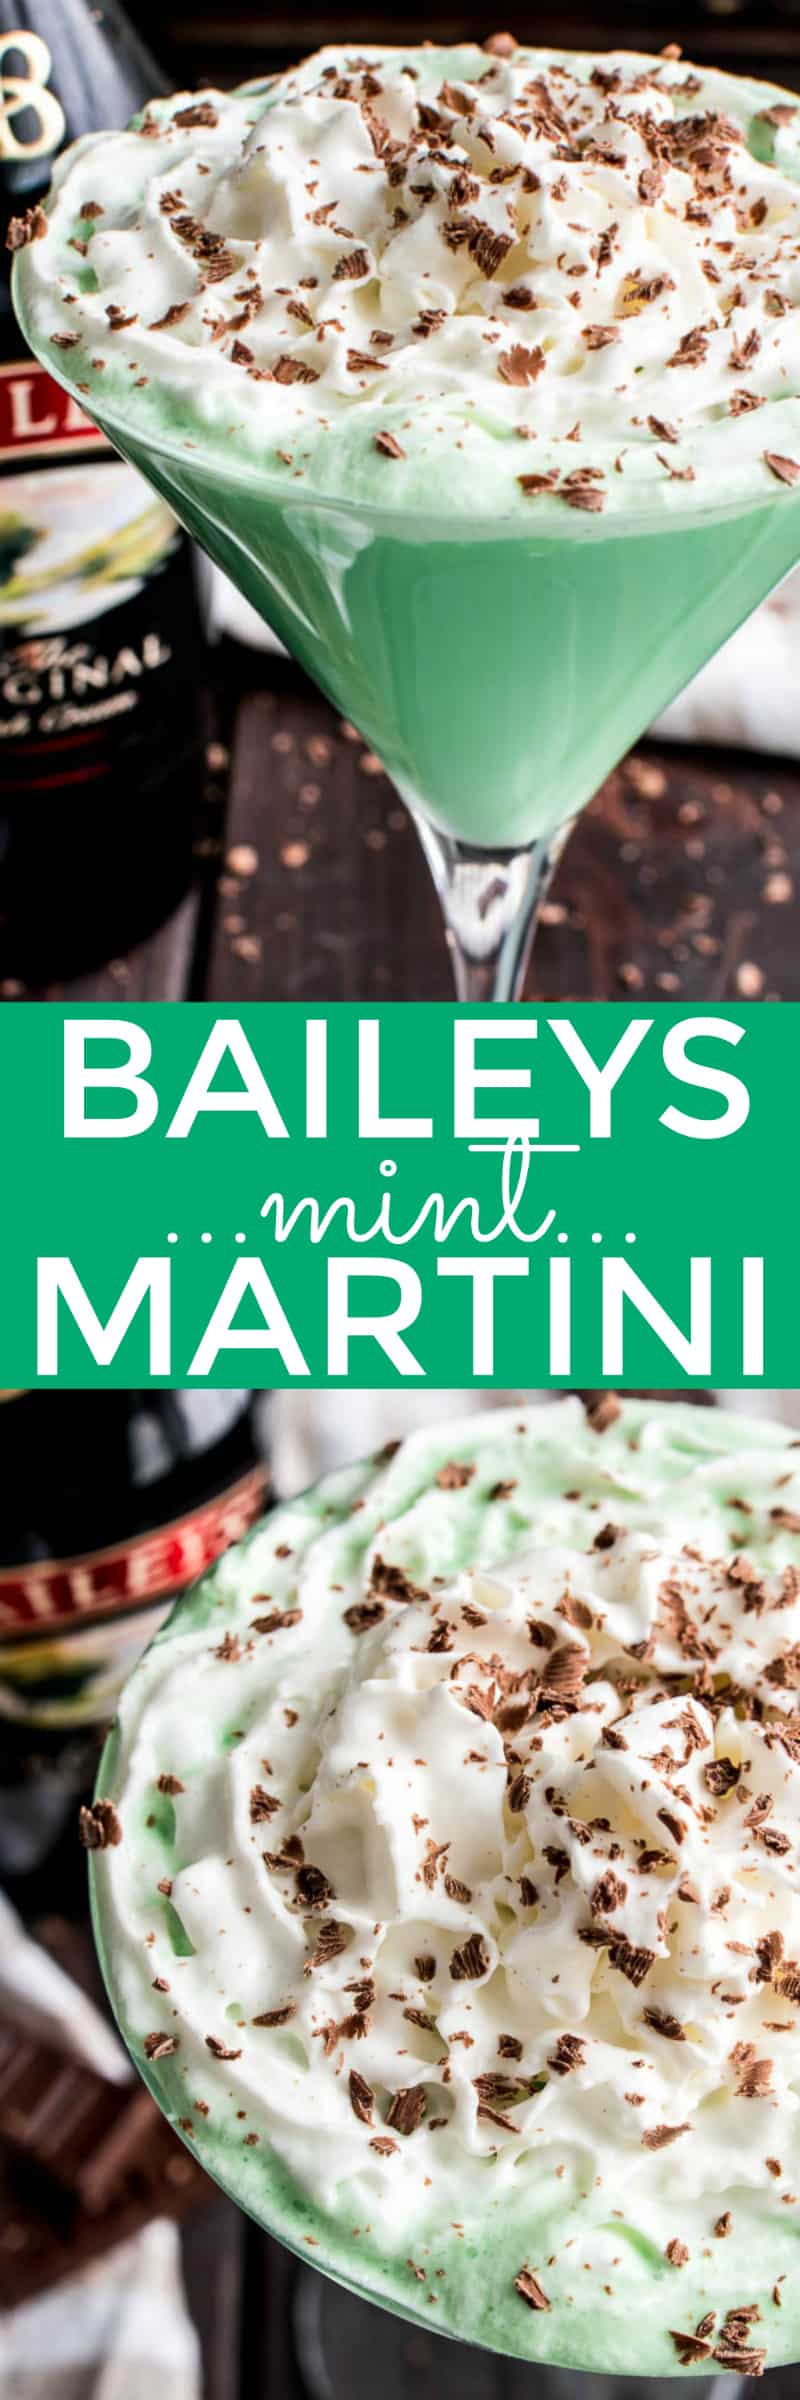 This Baileys Mint Martini is the ultimate combo! Creme de Menthe combined with Baileys Irish Cream in one delicious cocktail that's perfect for St. Patrick's Day, Christmas, or any special occasion. This minty martini not only tastes amazing, but also has the most vibrant green color, making it a fun and festive cocktail for all your holiday celebrations! If you love Baileys, you can't go wrong with this delicious Baileys Mint Martini....made with just 4 ingredients!